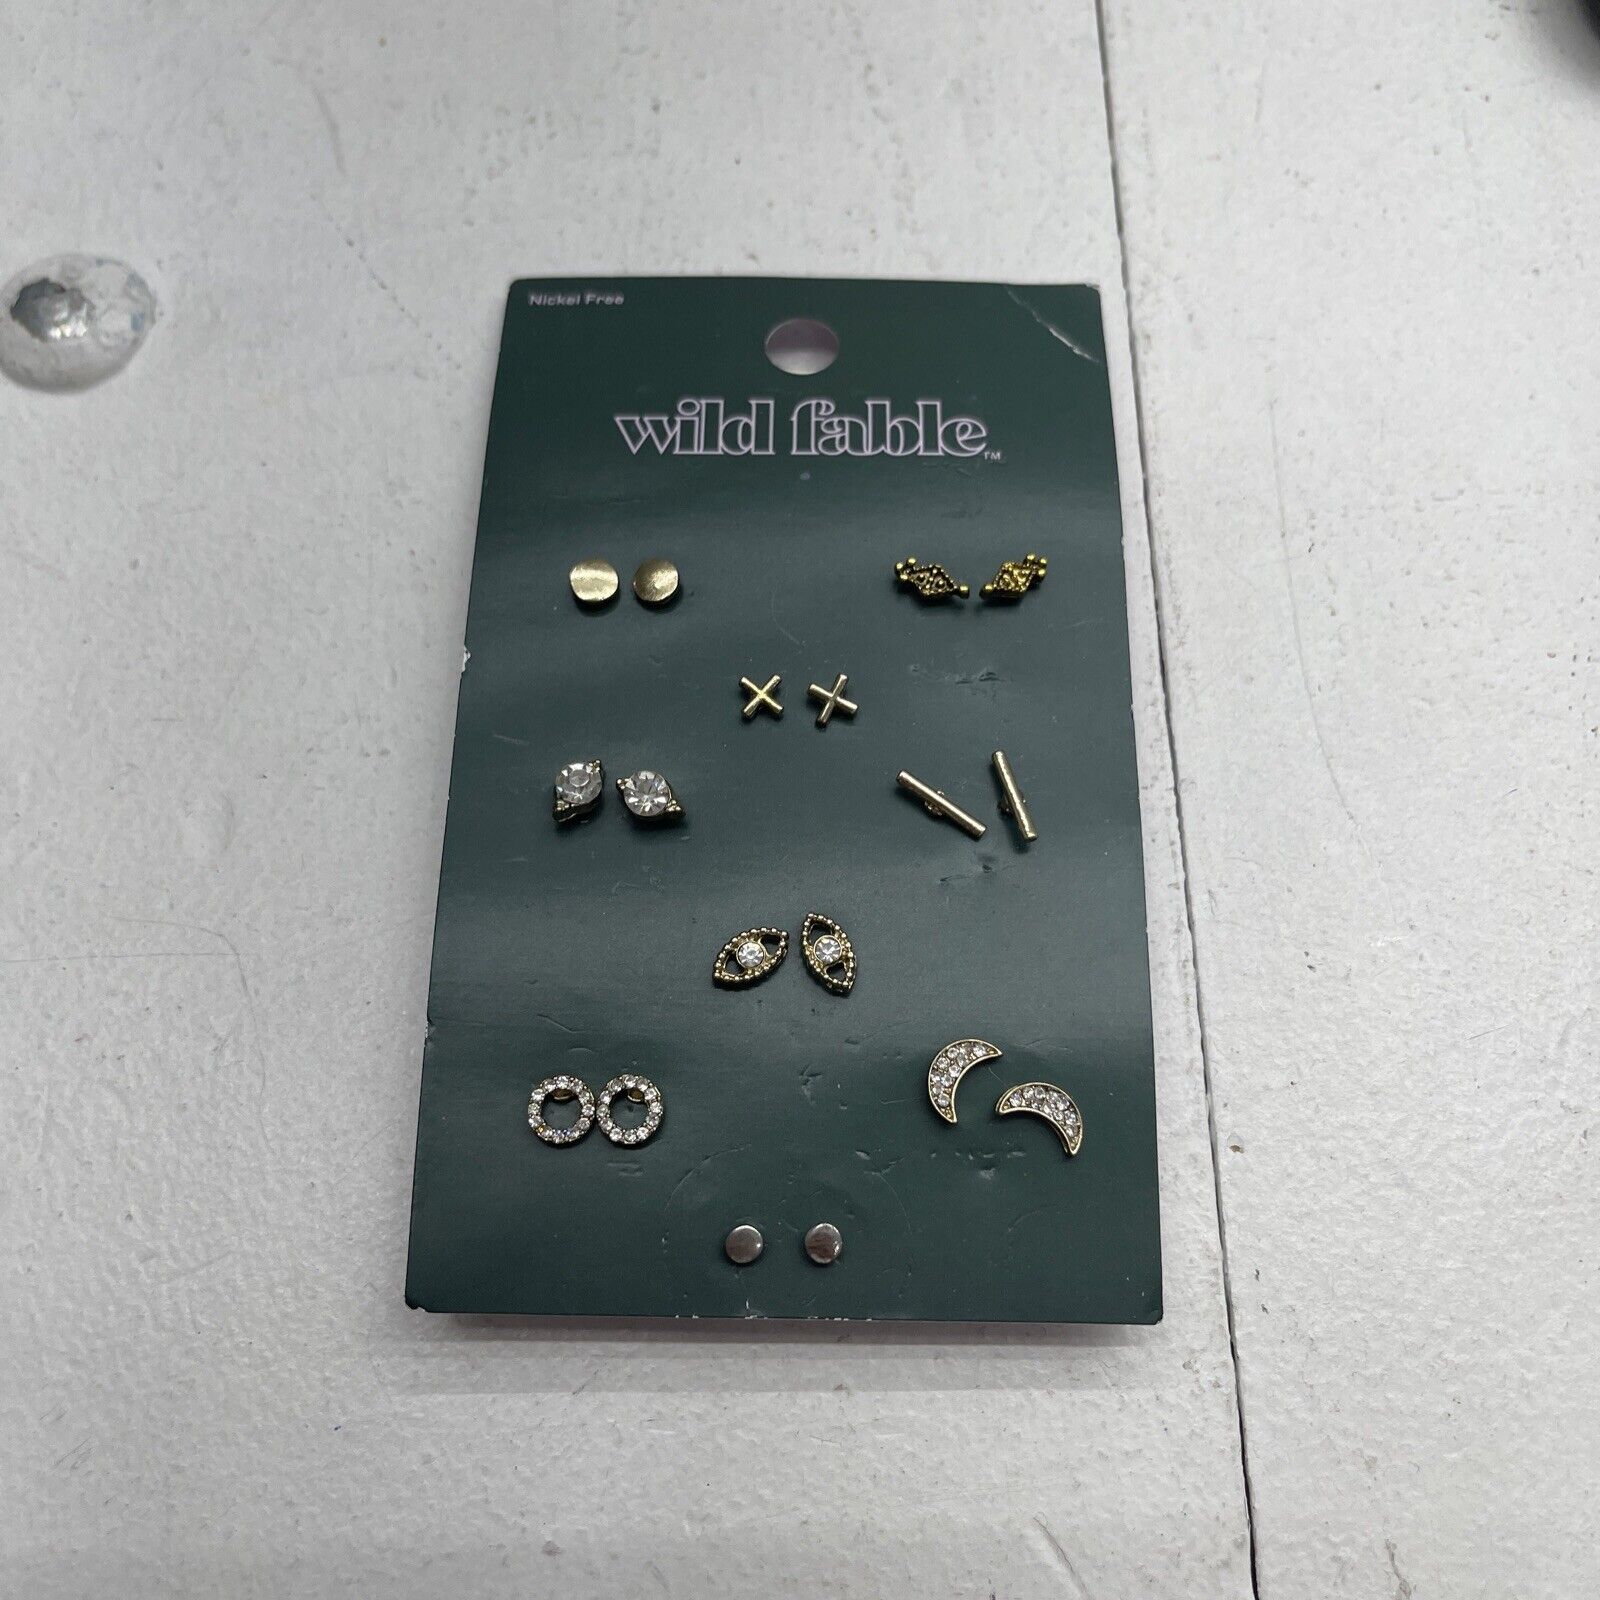 Wild Fable Nickel Free Gold 9 Pack Earring Studs New